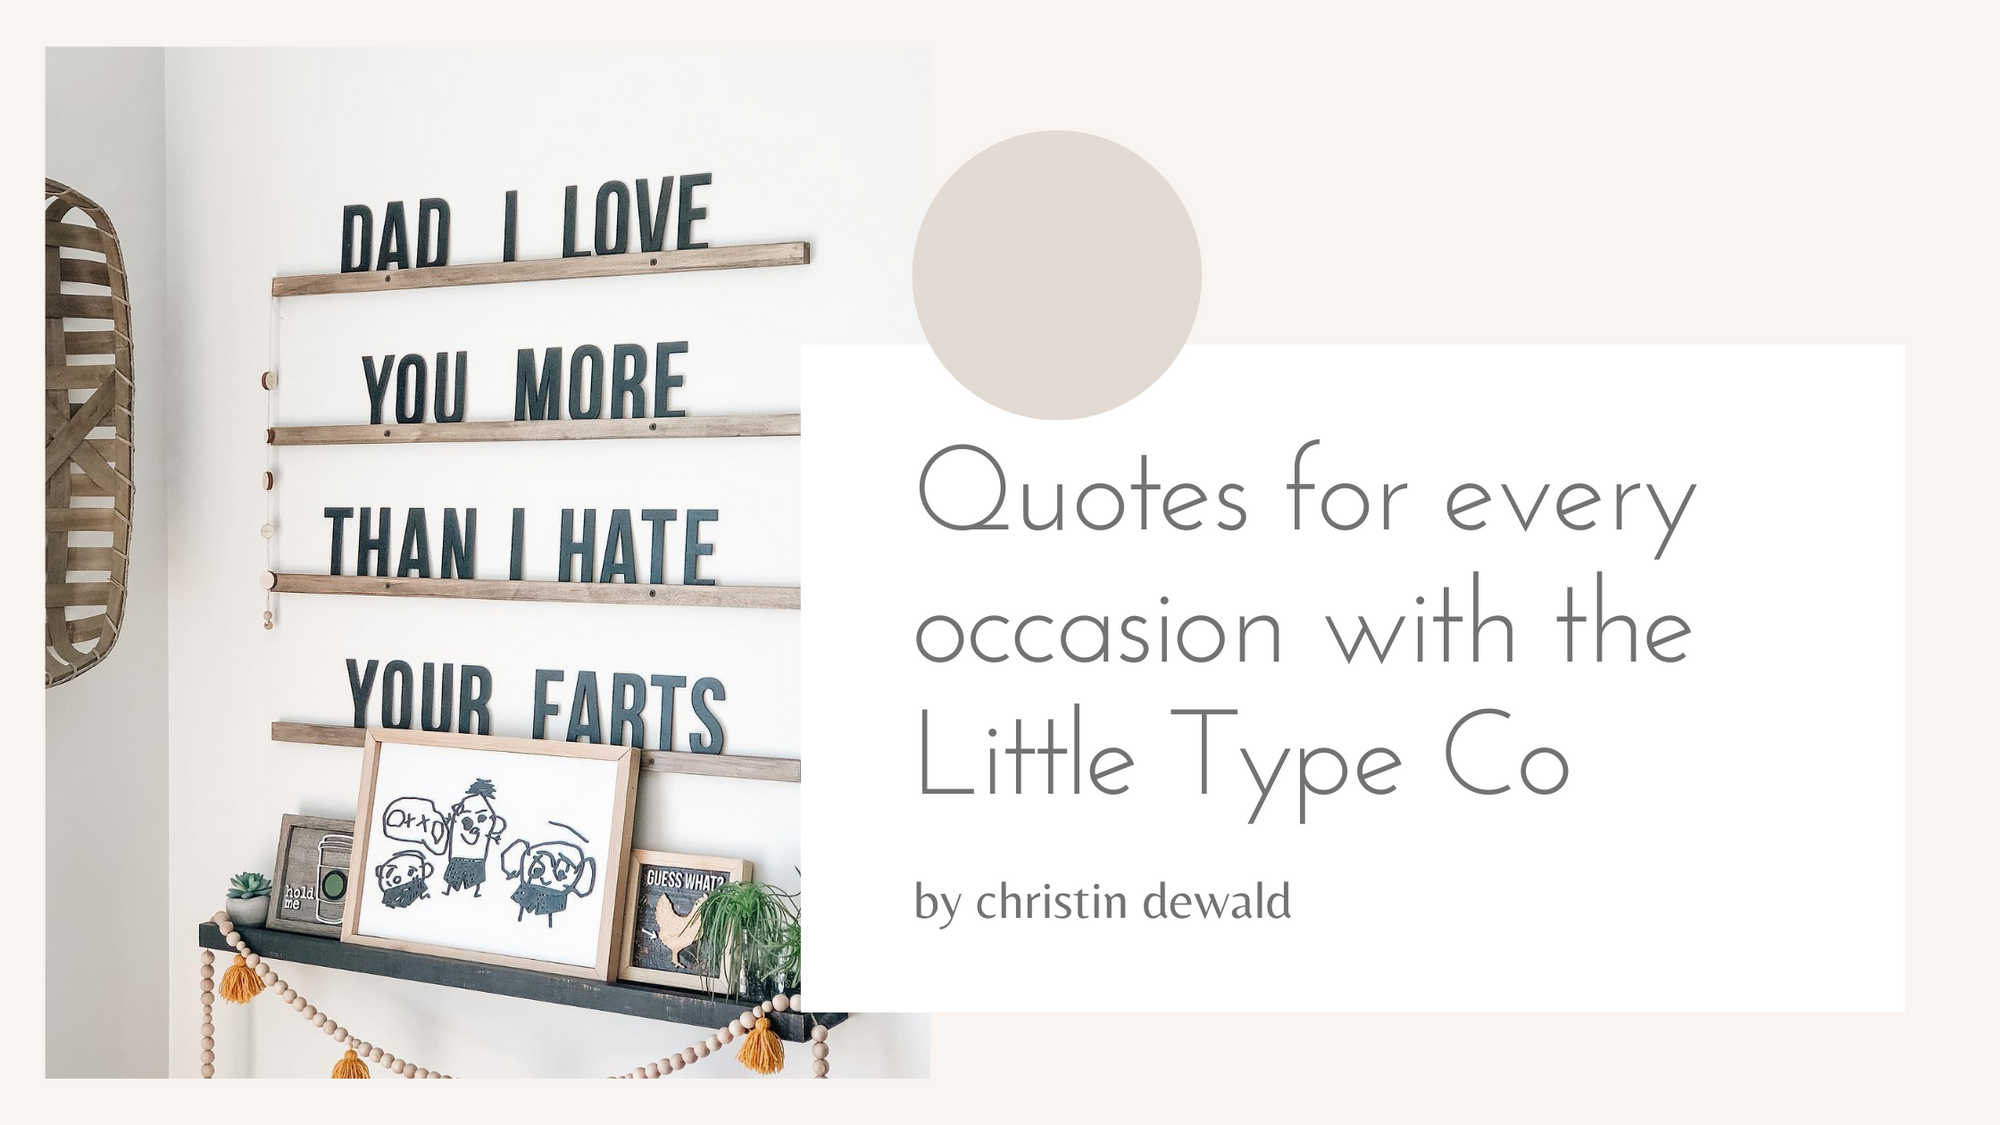 Quotes for every occasion with the Little Type Co